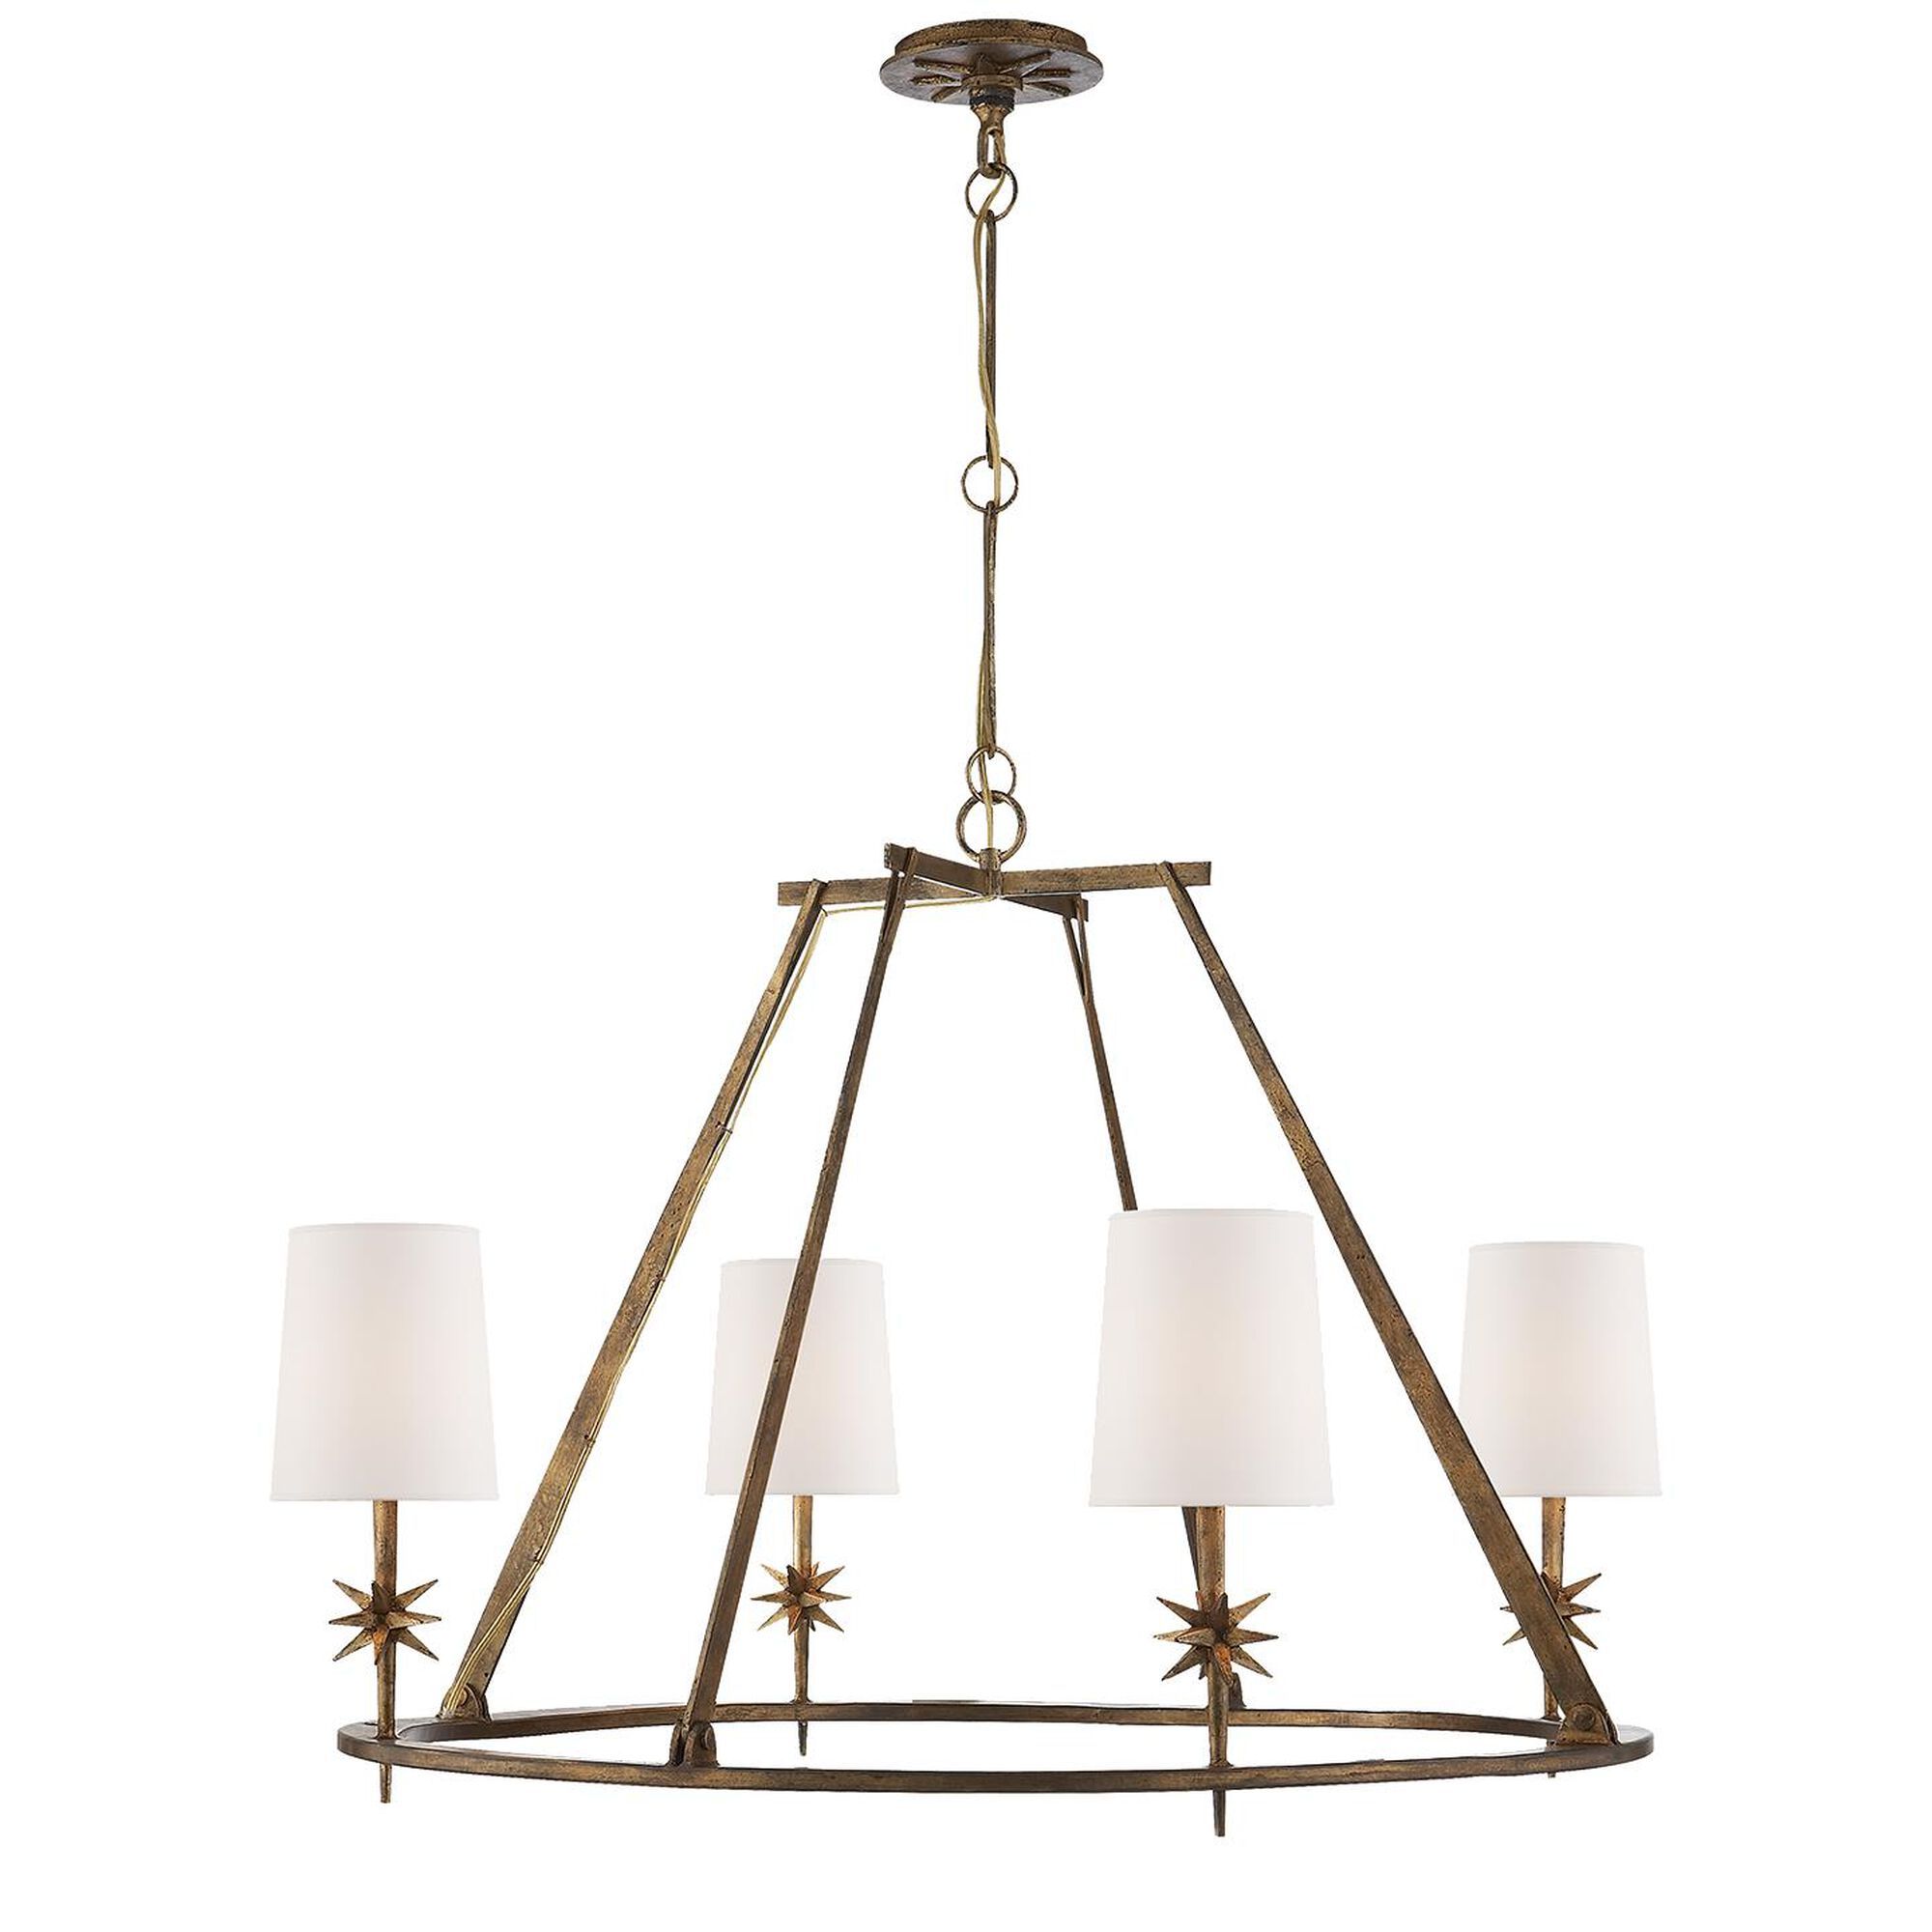 Ian K. Fowler Etoile 35 Inch 4 Light Chandelier by Visual Comfort and Co. | Capitol Lighting 1800lighting.com